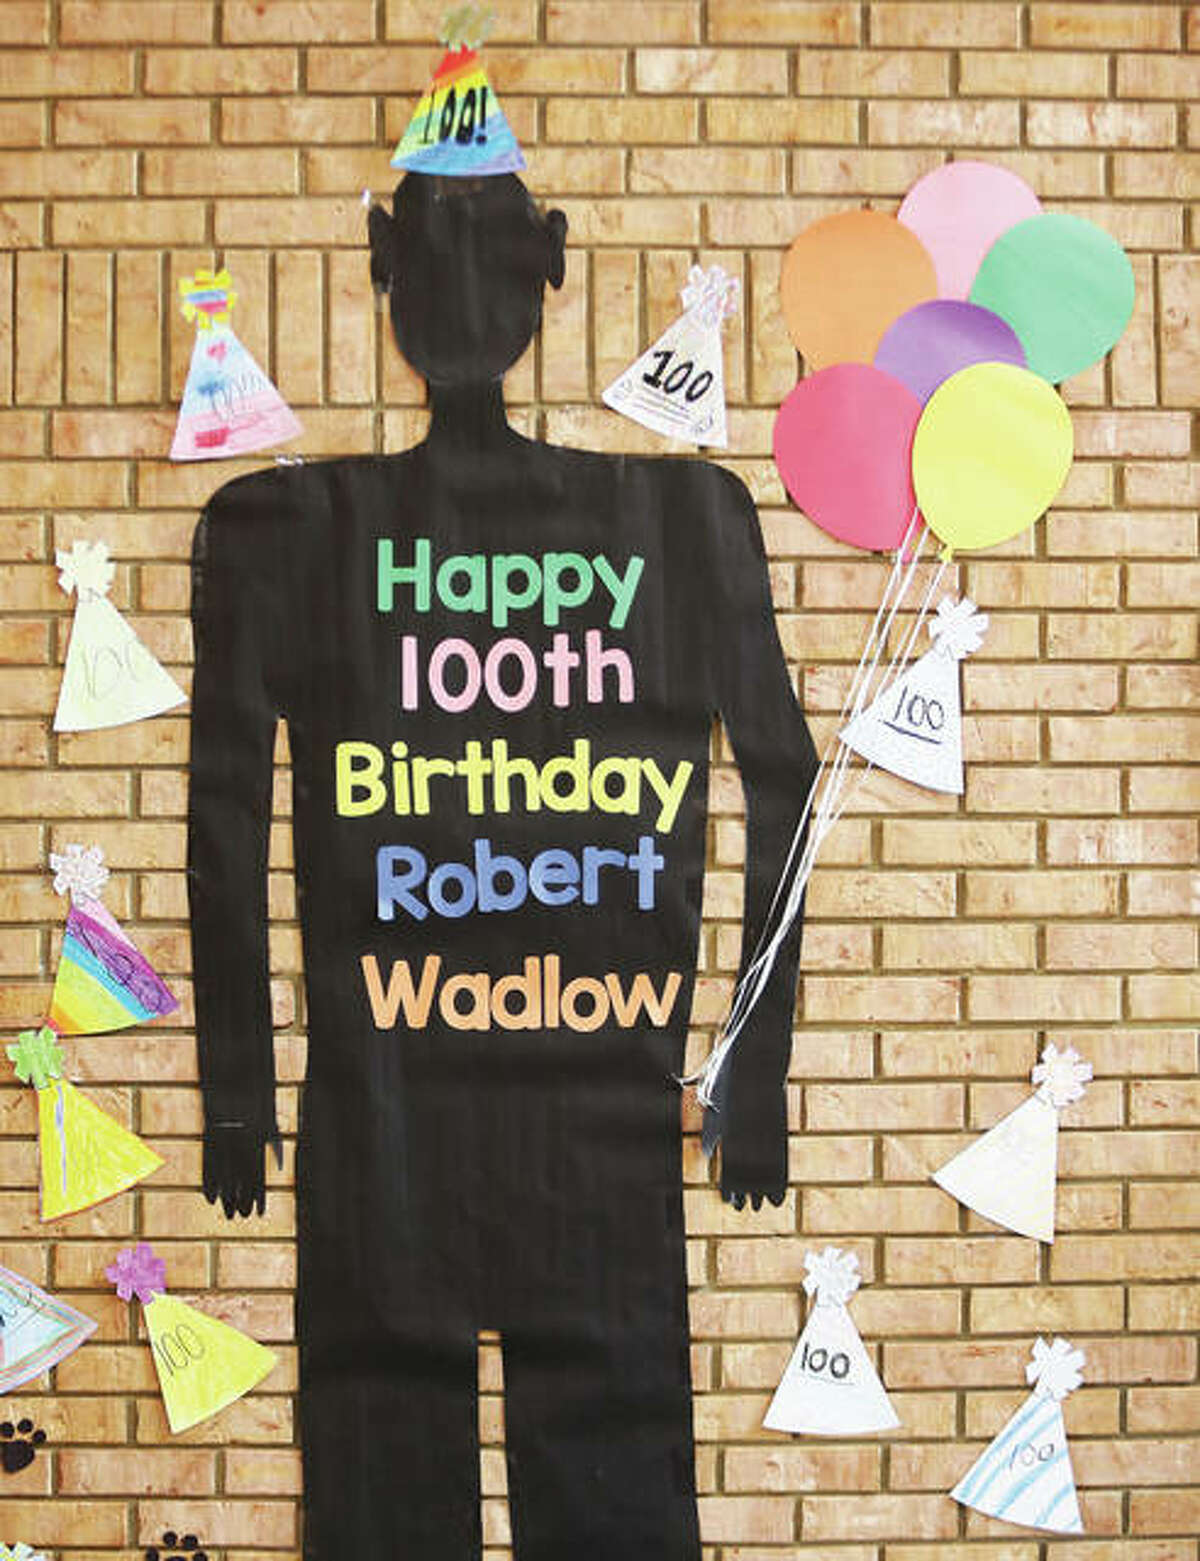 One of the hallway displays at Evangelical School in Godfrey where students have been drawing, writing and learning about the worlds tallest man, Robert Wadlow, on his 100th birthday Thursday. Robert Wadlow died in 1940 at the age of 22 and was 8 feet, 11.1 inches tall.